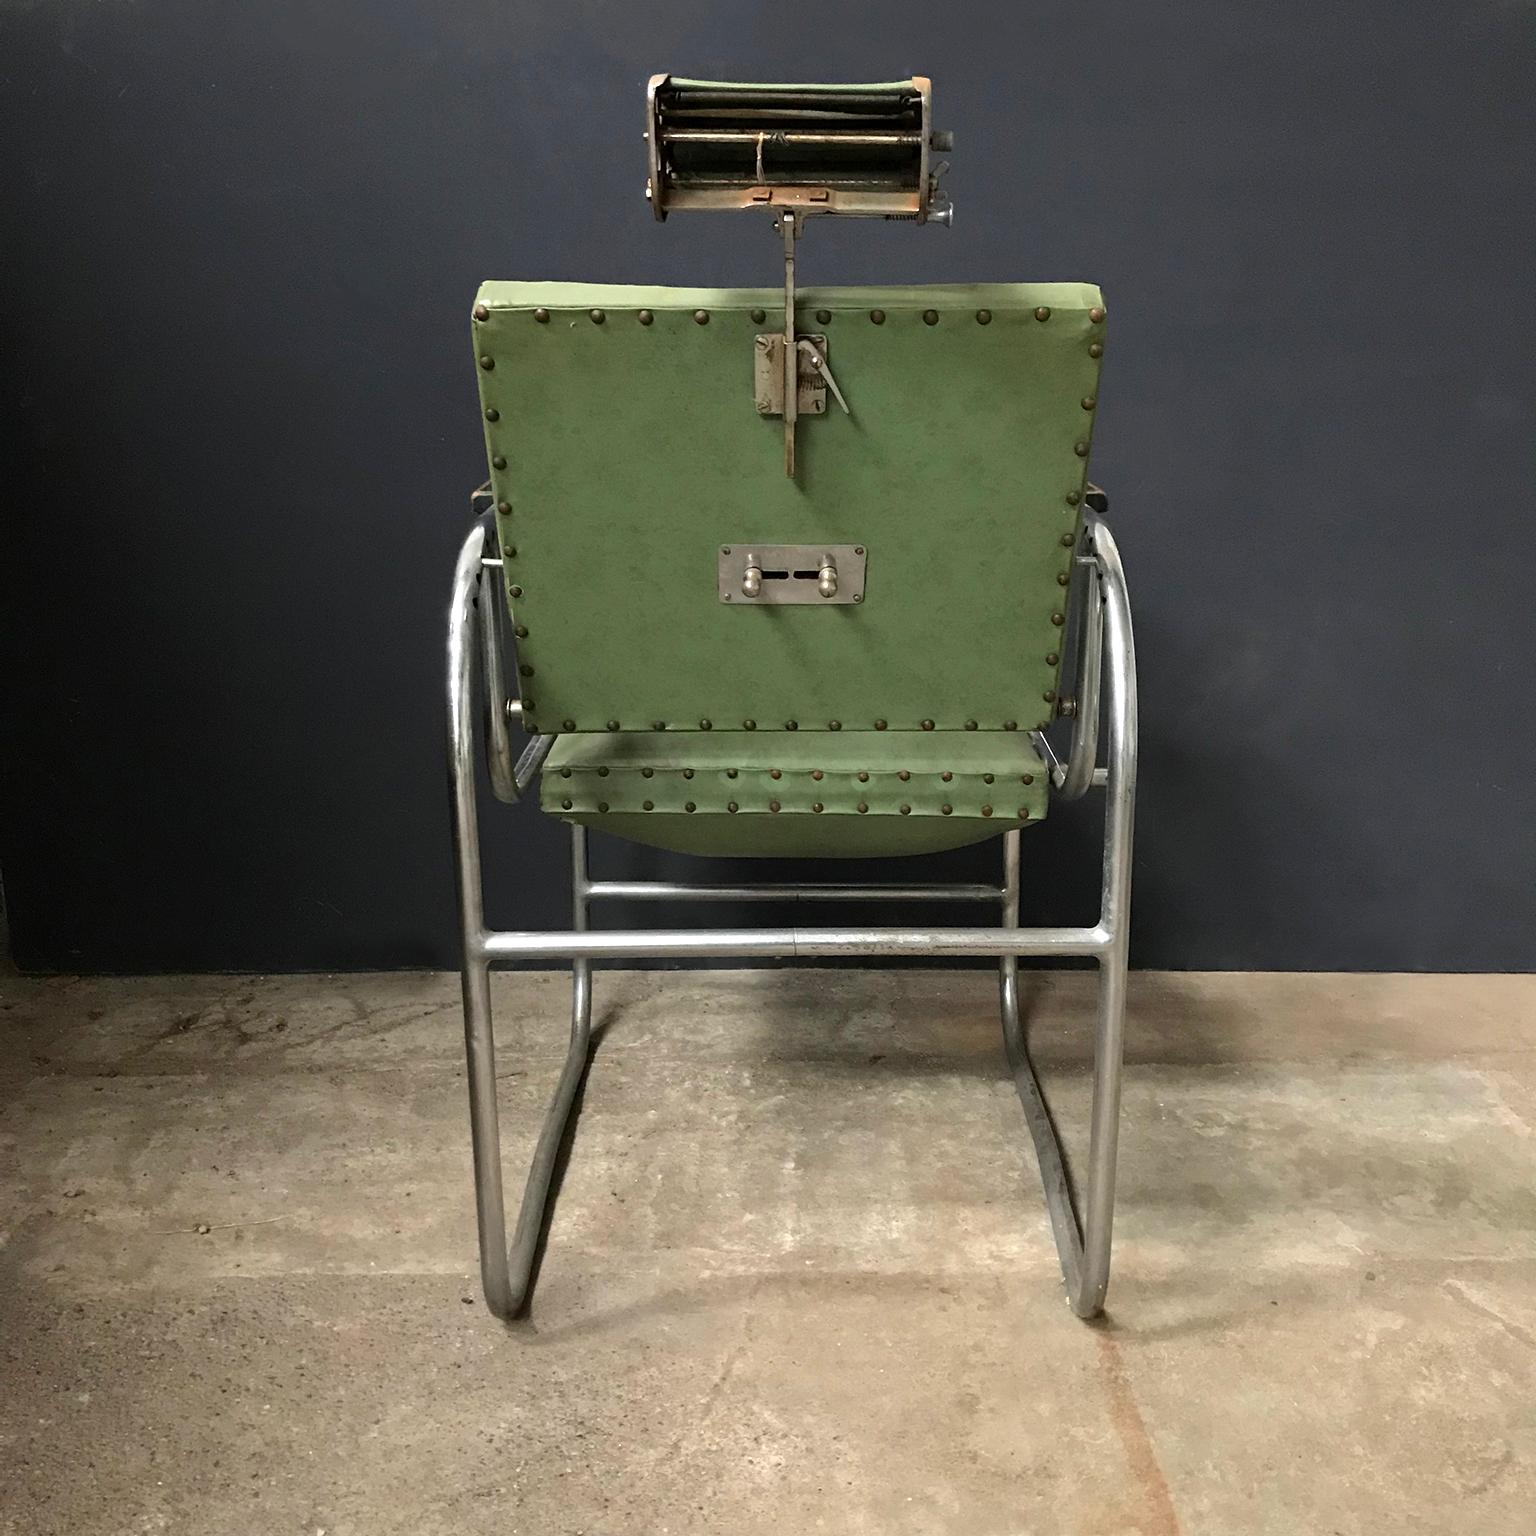 Mid-20th Century Original Barber Chair with Original Green Upholstery, Rotated Seat, circa 1950